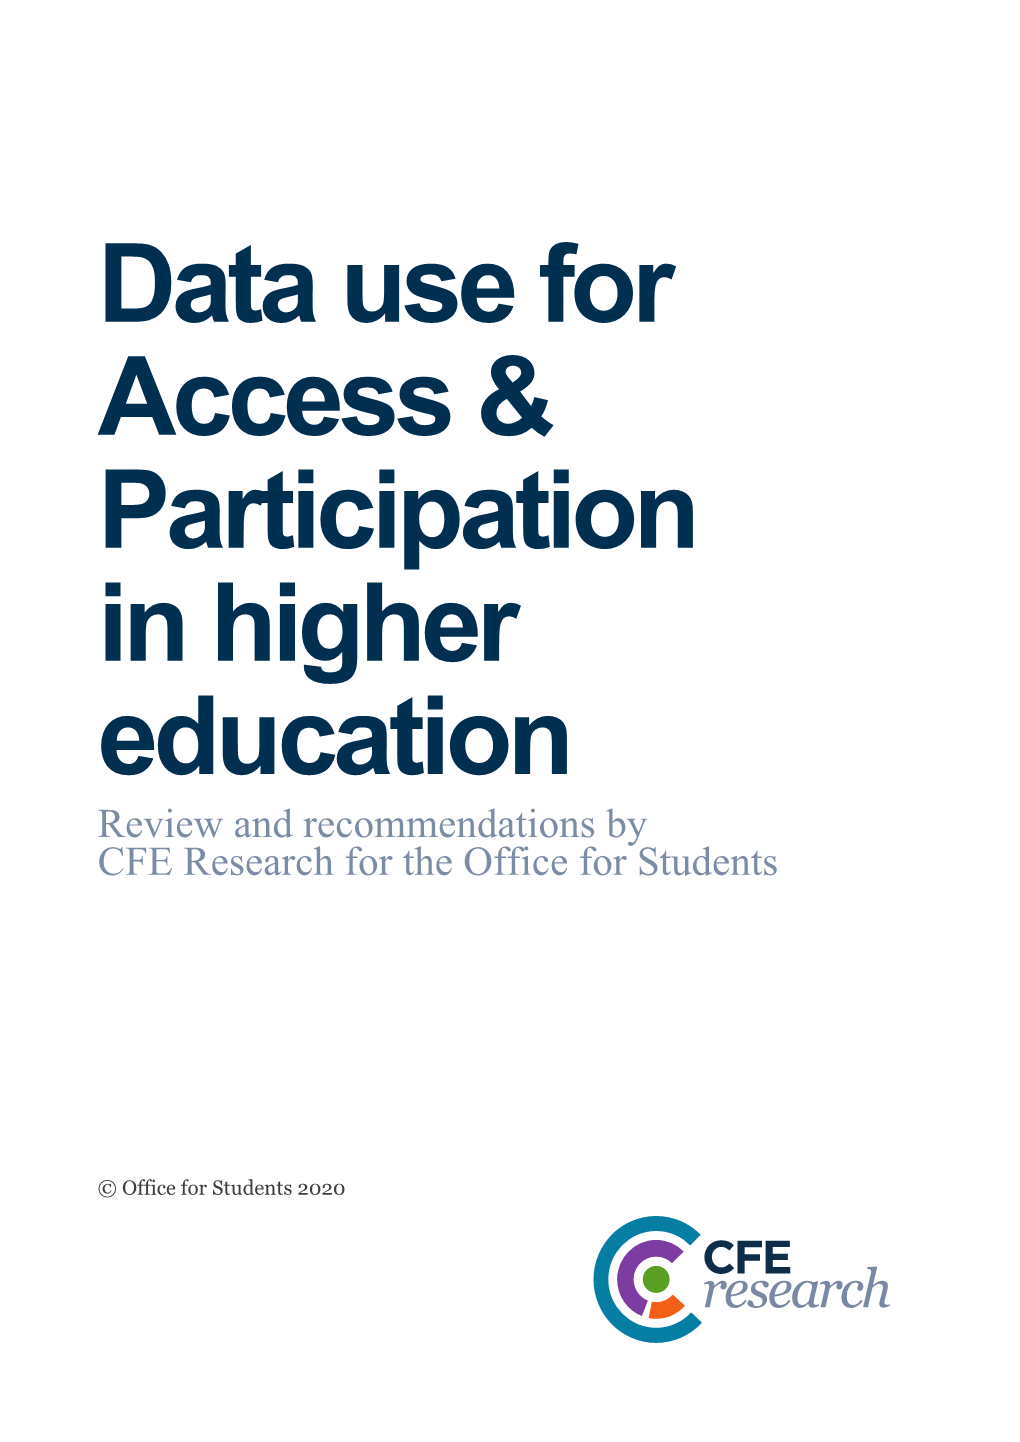 Data Use for Access & Participation in Higher Education